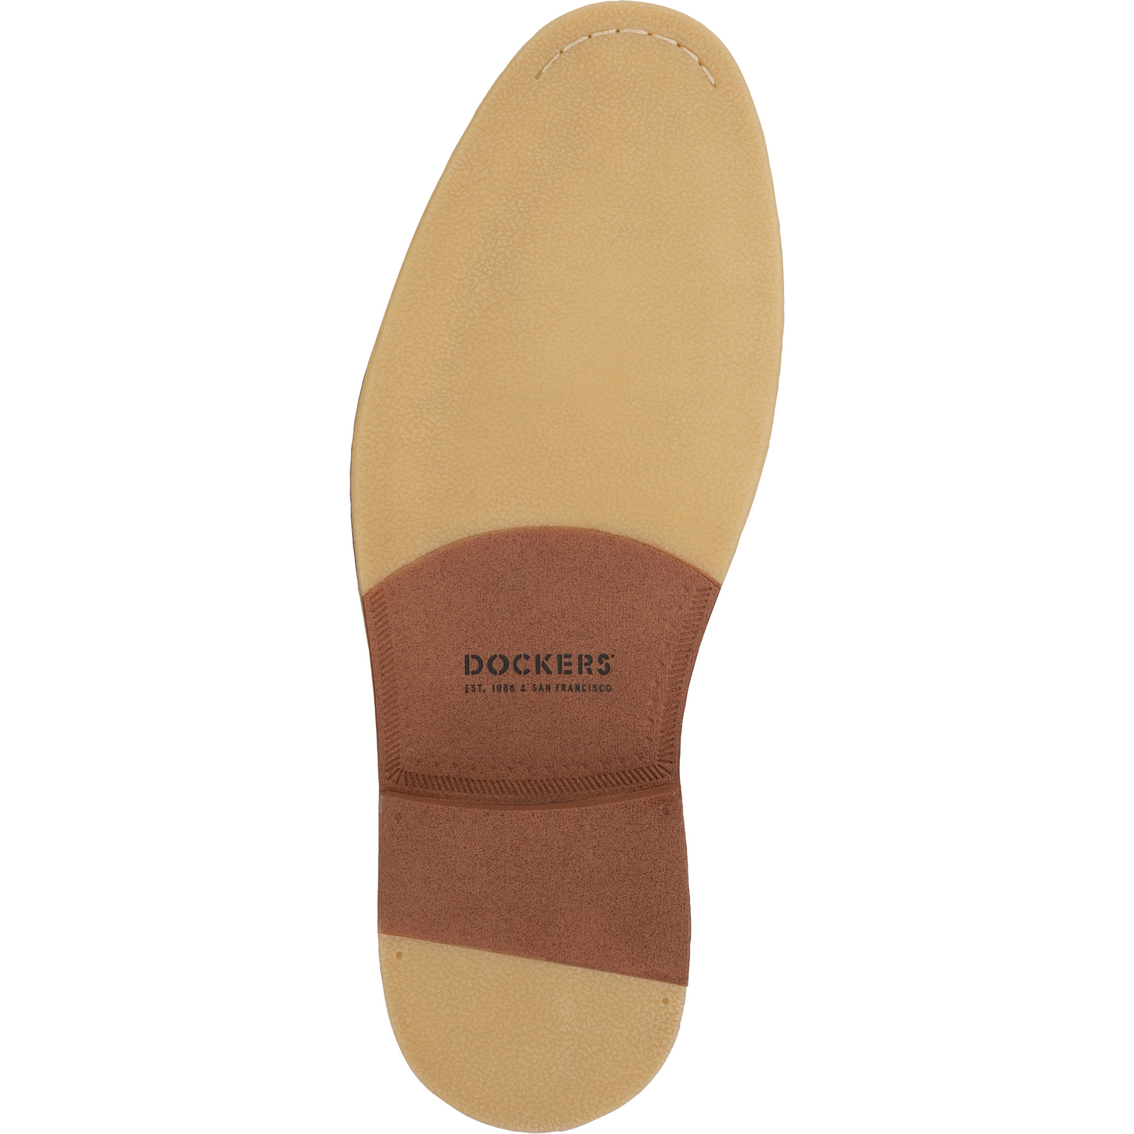 Dockers Martin Oxford Shoes - Image 5 of 6